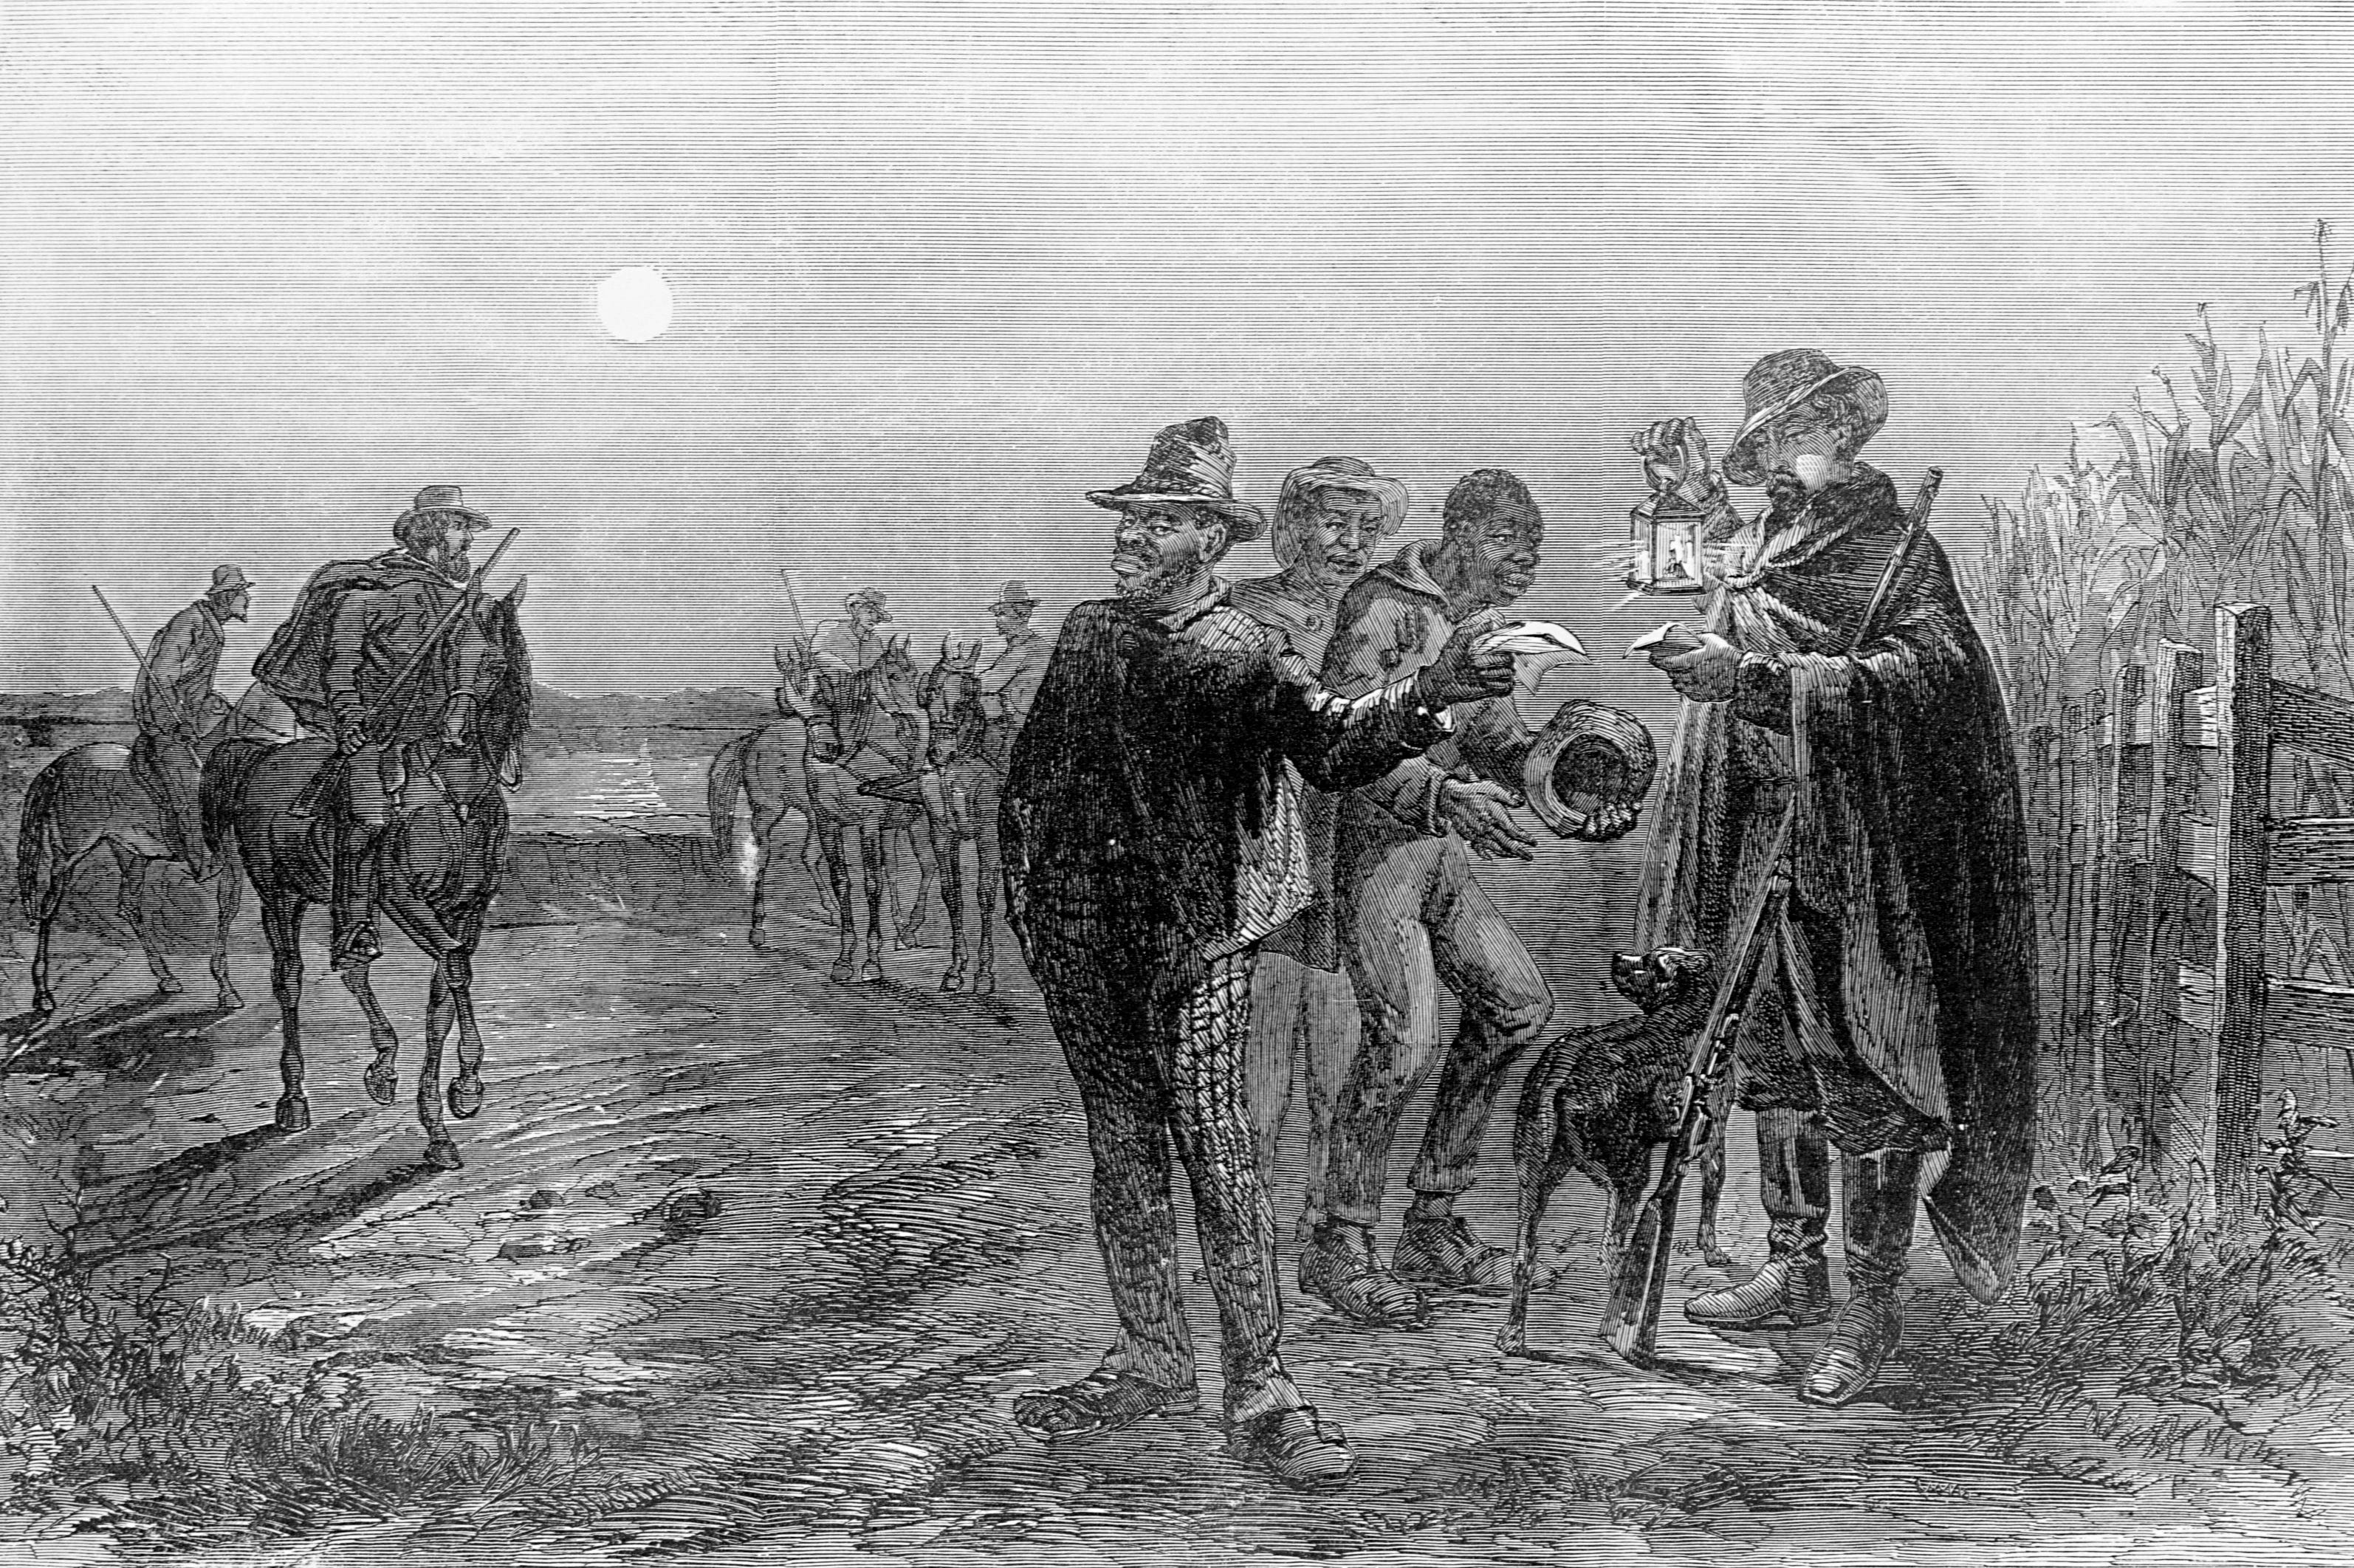 Plantation police look over the passes of enslaved people along a road near New Orleans in the 19th century. With or without a pass from their masters, enslaved people could be jailed and whipped at an officer's discretion.